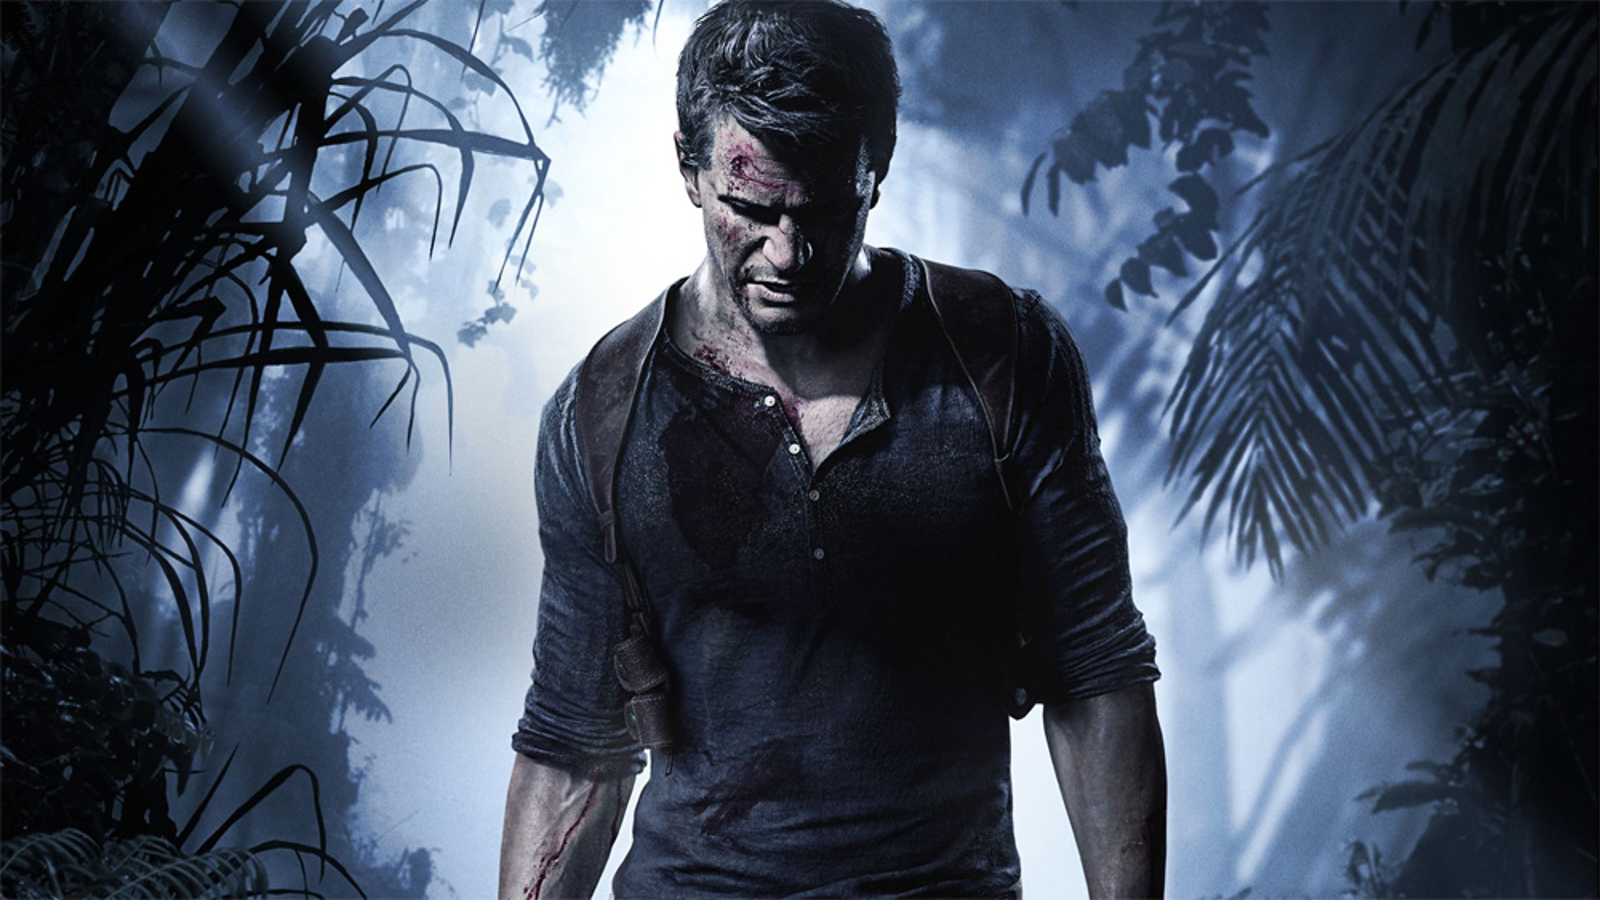 Uncharted 4: A Thief's End New Videos Take Us Behind The Scenes